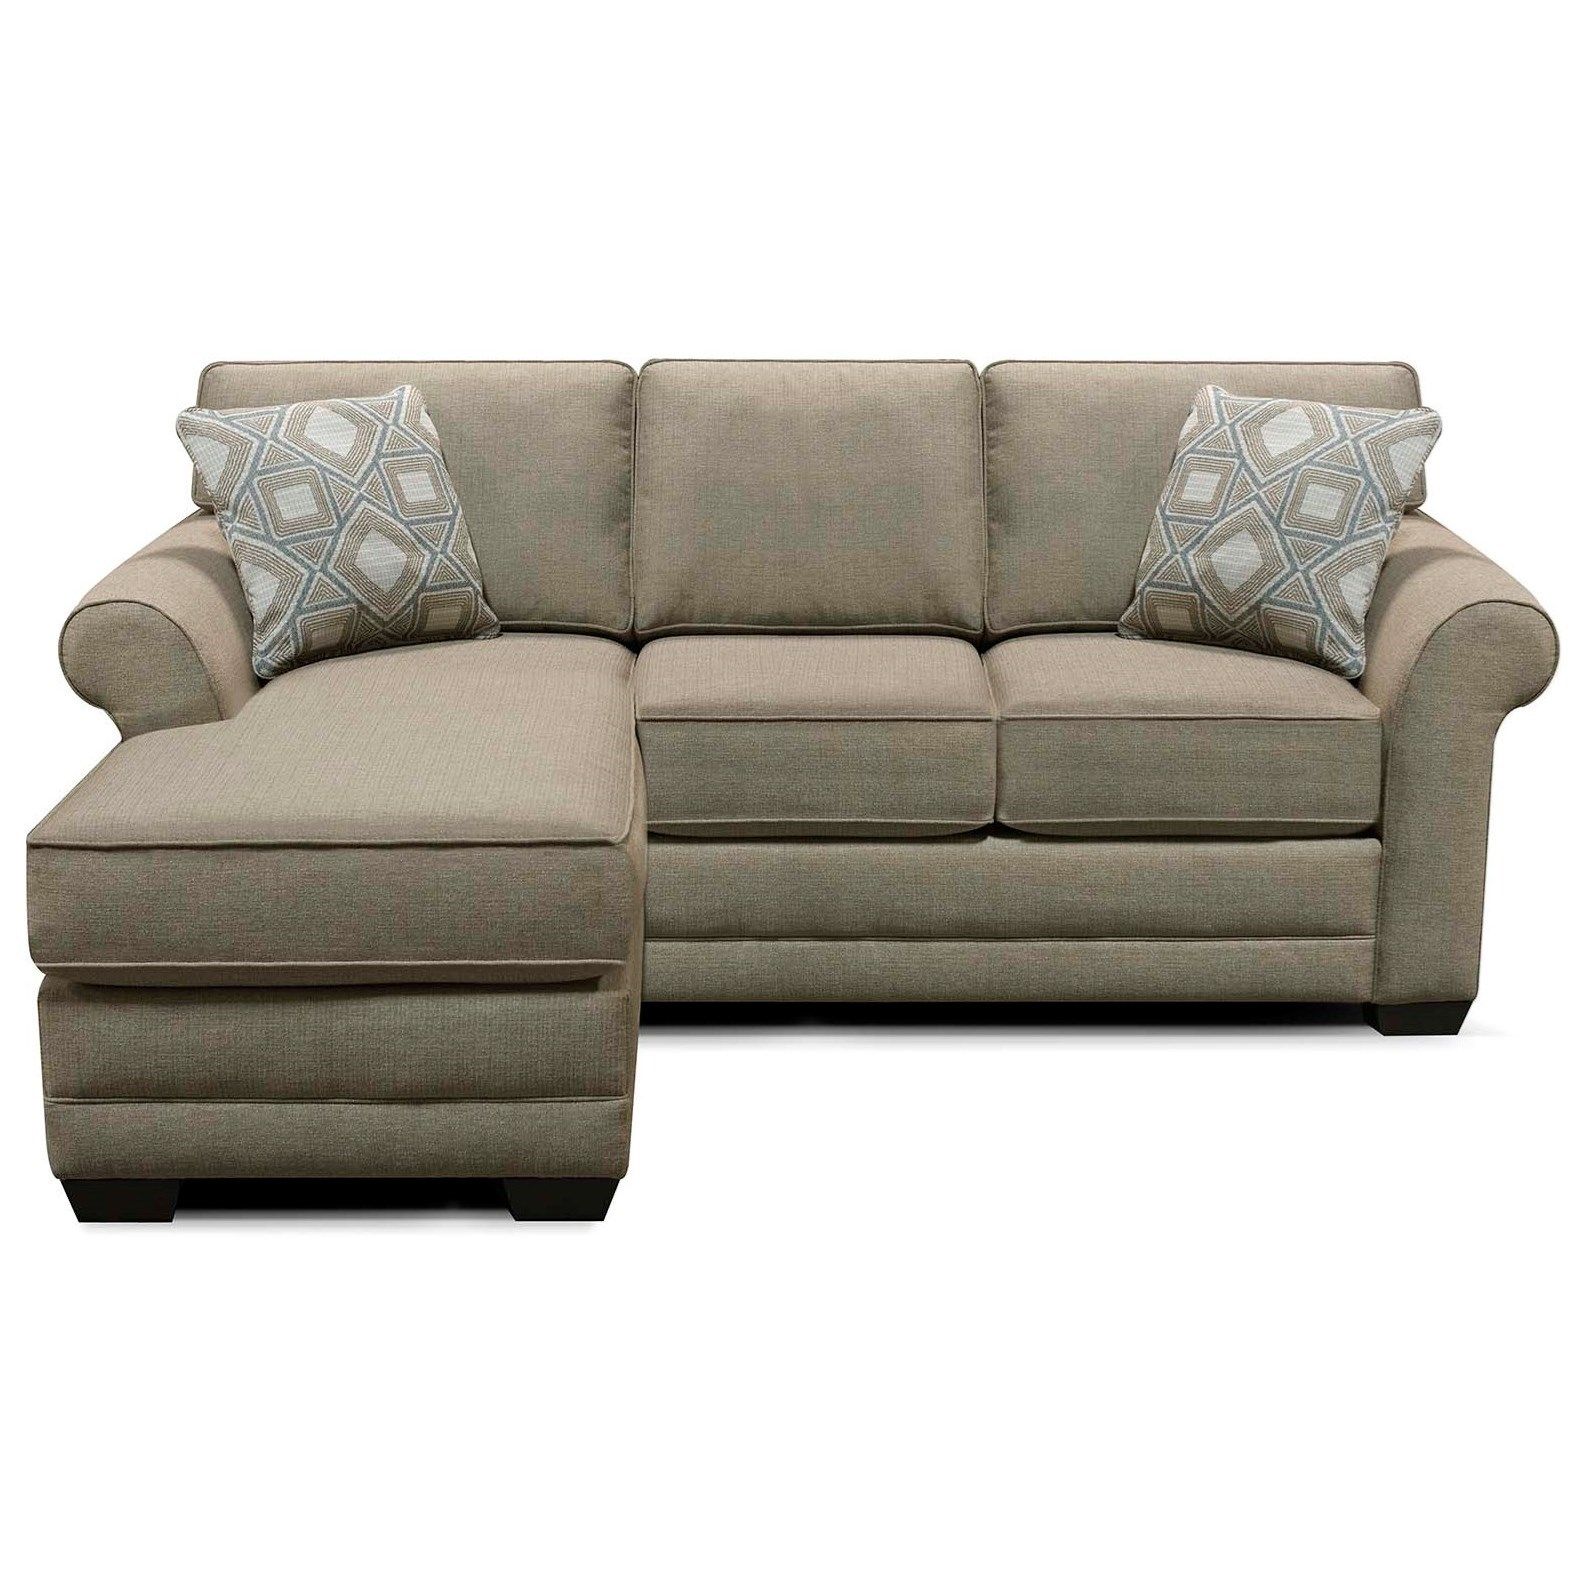 England Wallace Transitional Sofa With Floating Ottoman Chaise | Superstore  | Sectional – Sofa Groups Inside Floating Ottomans (View 13 of 20)